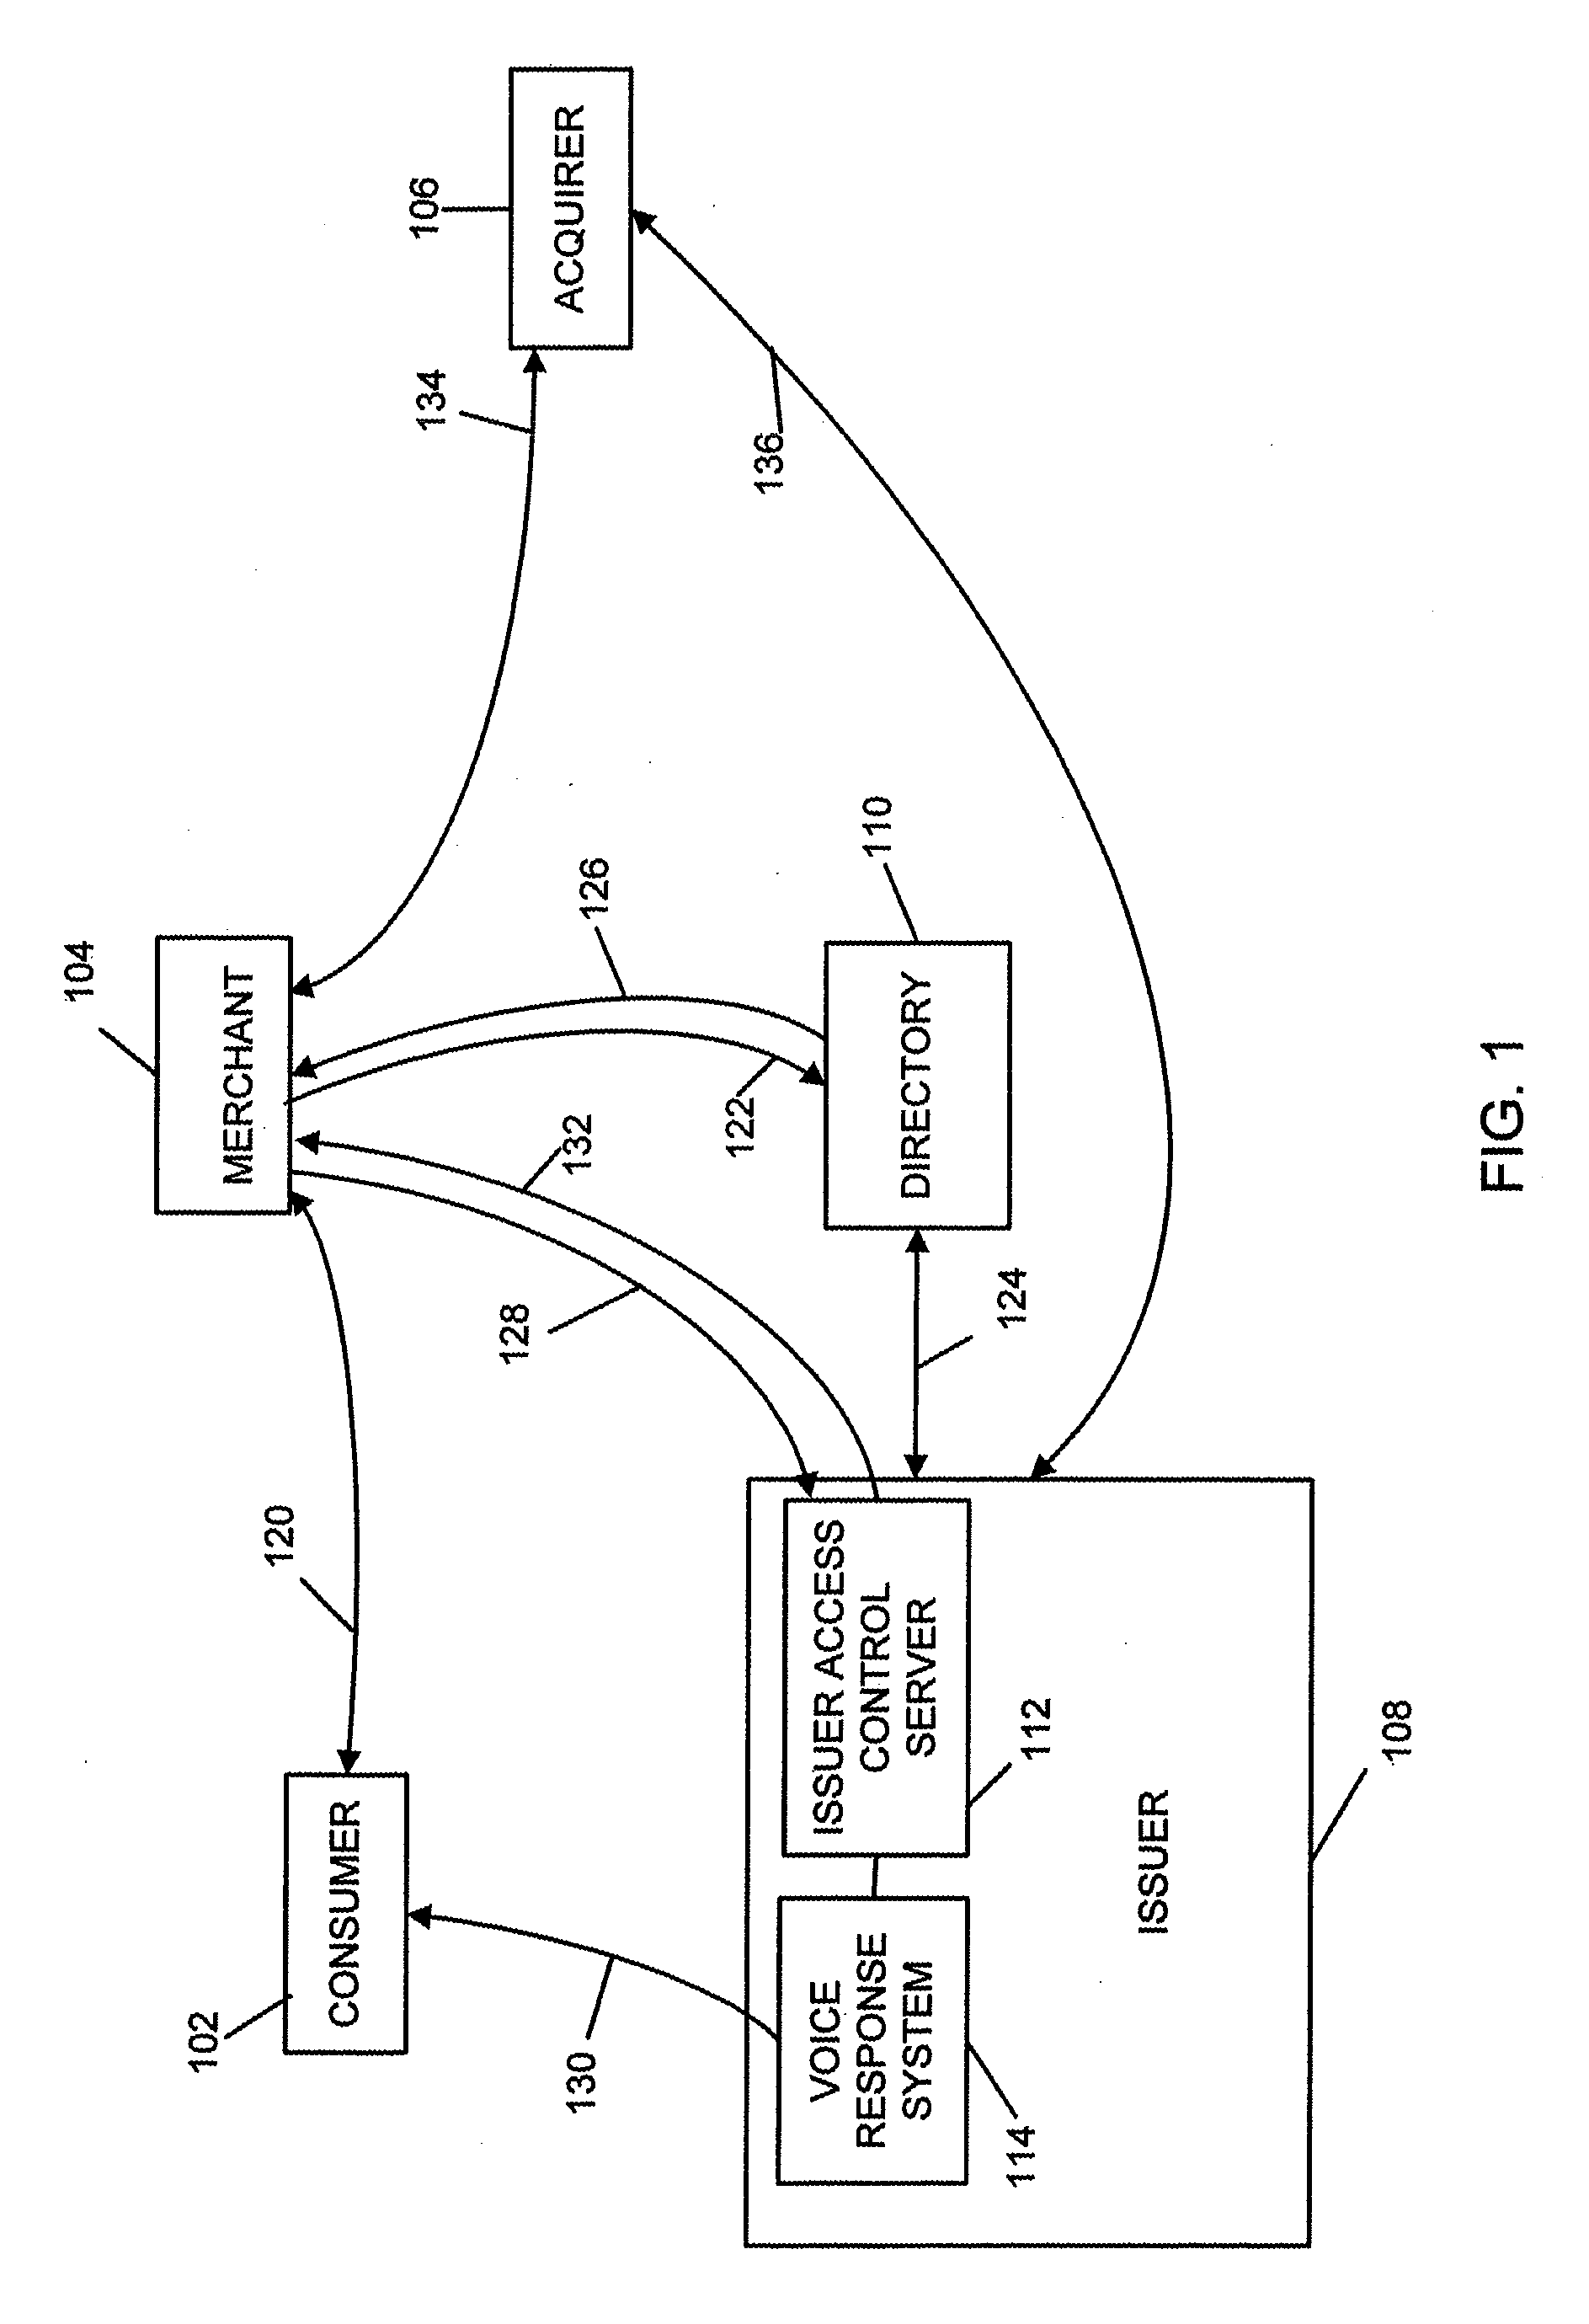 System and method for secure telephone and computer transactions using voice authentication